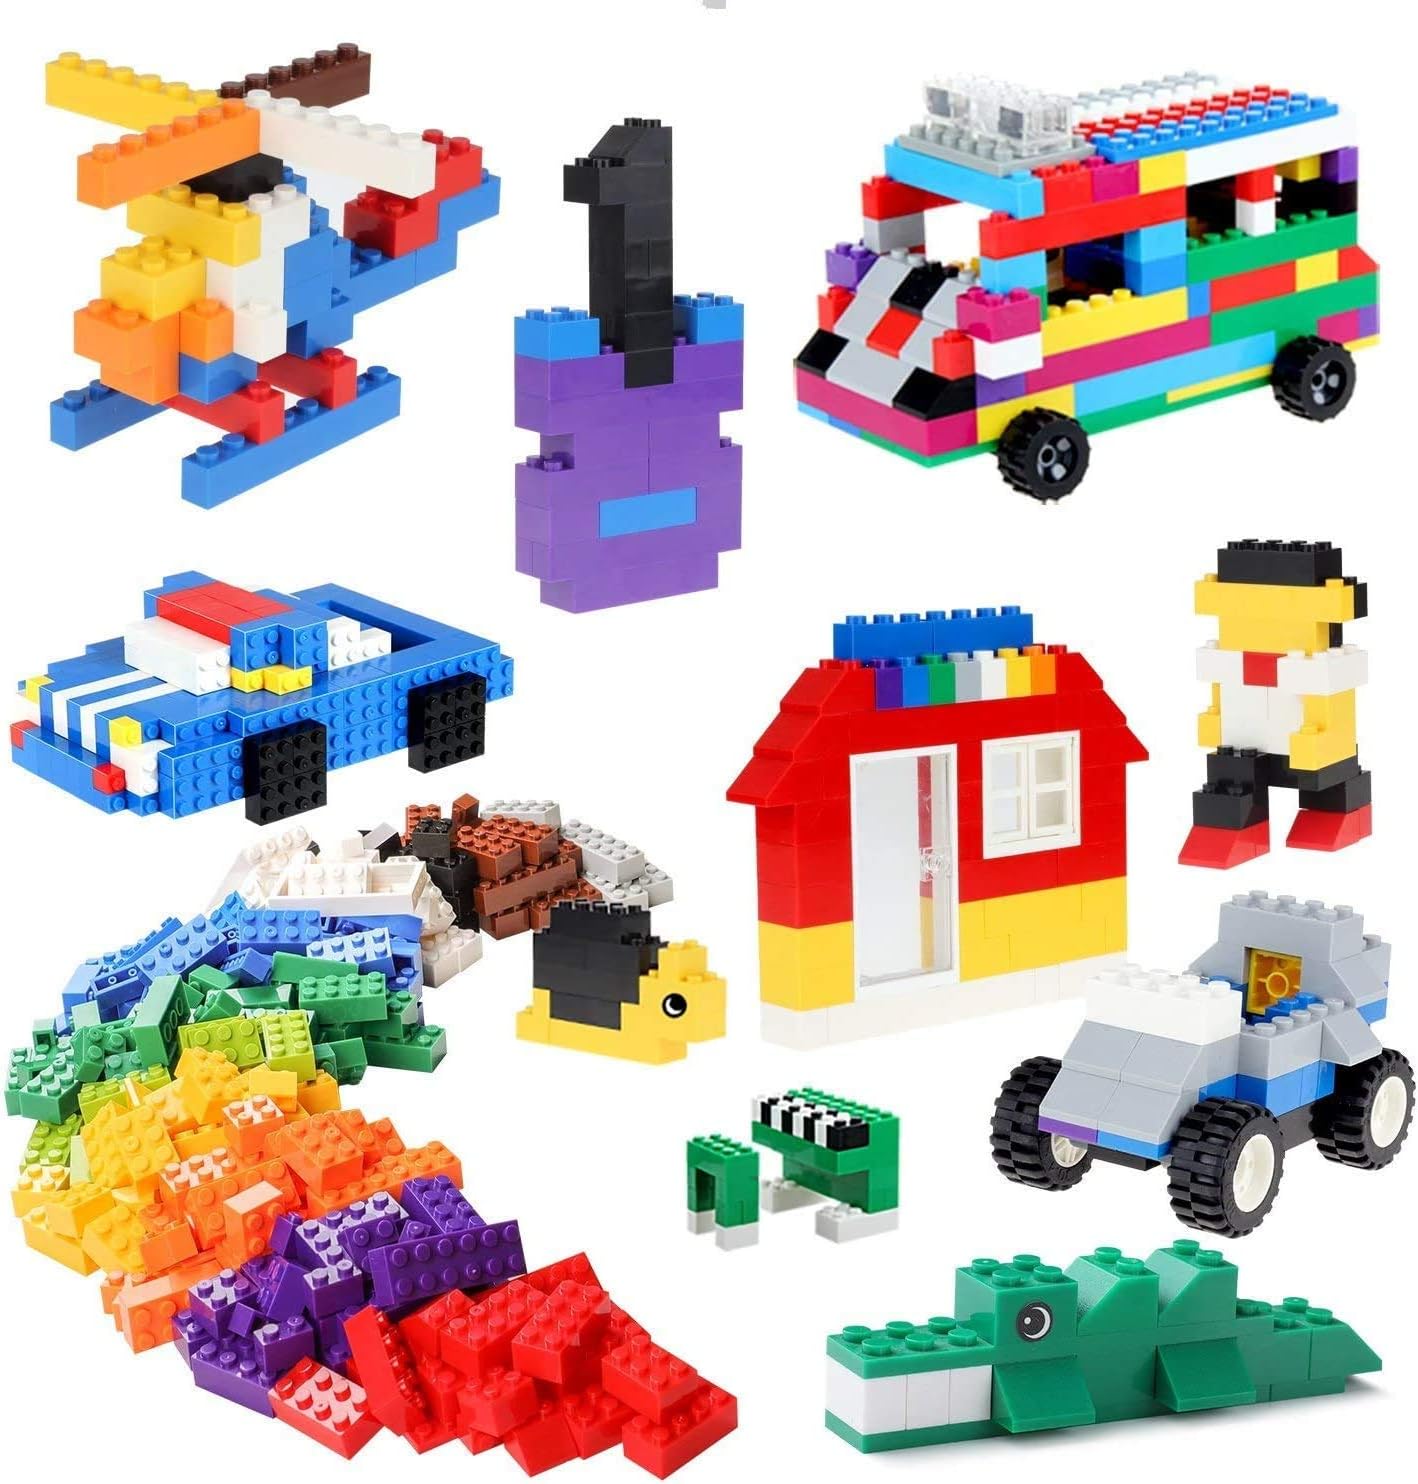 burgkidz Building Bricks 568 Pieces Toys, Classic Building Blocks Includes Wheels, Door, Window, Compatible Bulk Block with Storage Box and Baseplate, STEM Educational Gift for Kids 3+ Year